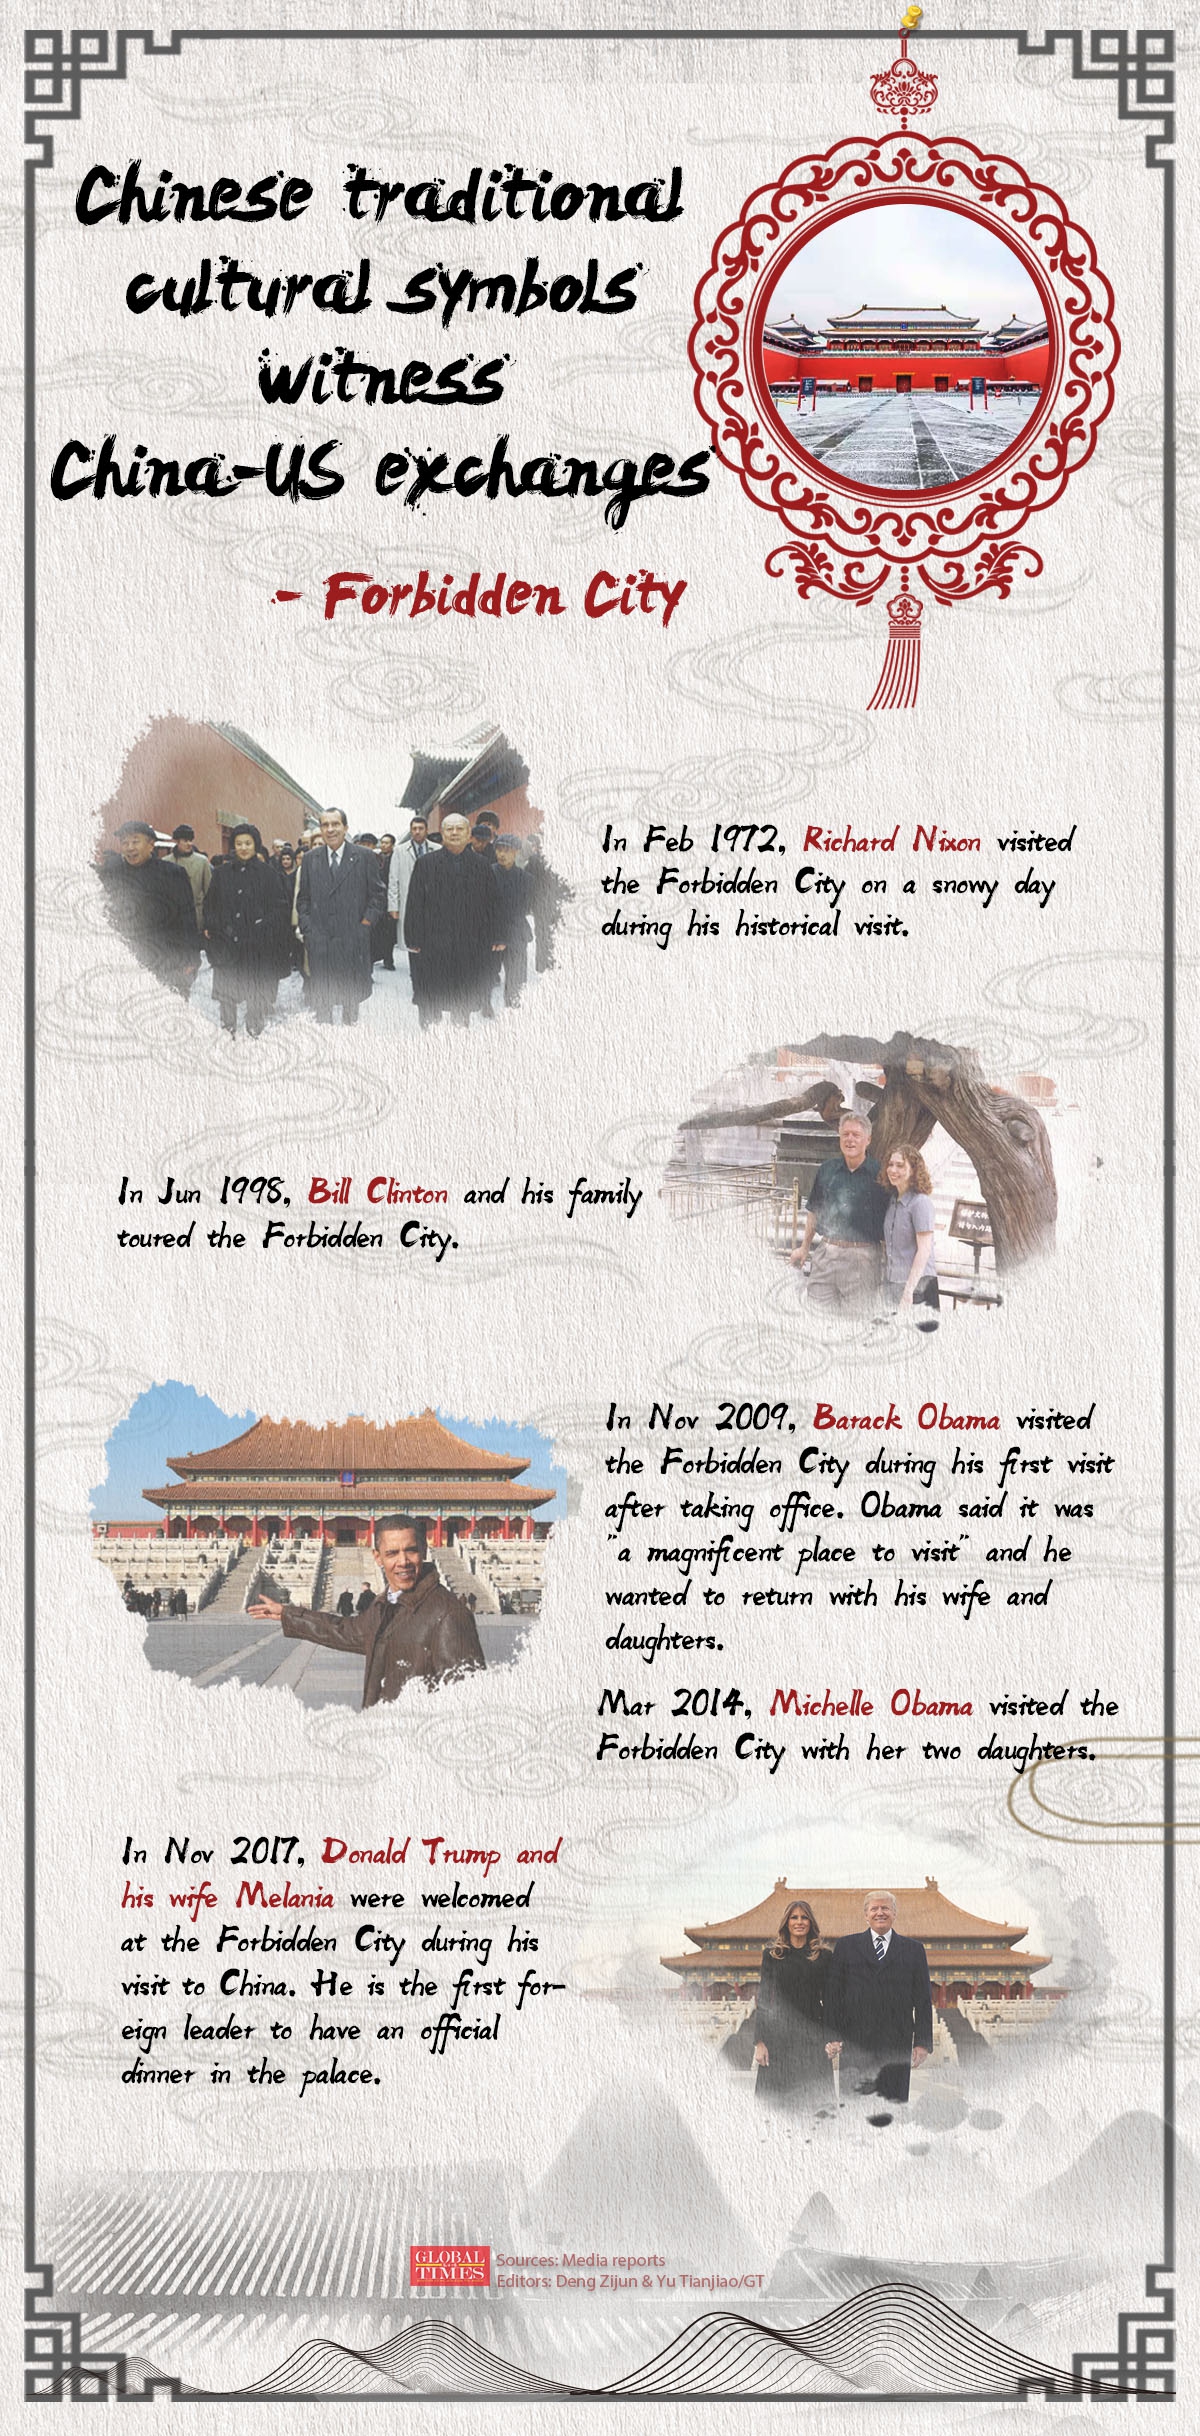 During Nixon's 1972 visit to China, the then US president visited the Great Wall and the Forbidden City. Beijing roast duck was served at the banquet and two giant pandas were given to the US as gift. Chinese cultural symbols have seen China-US exchanges ever since.